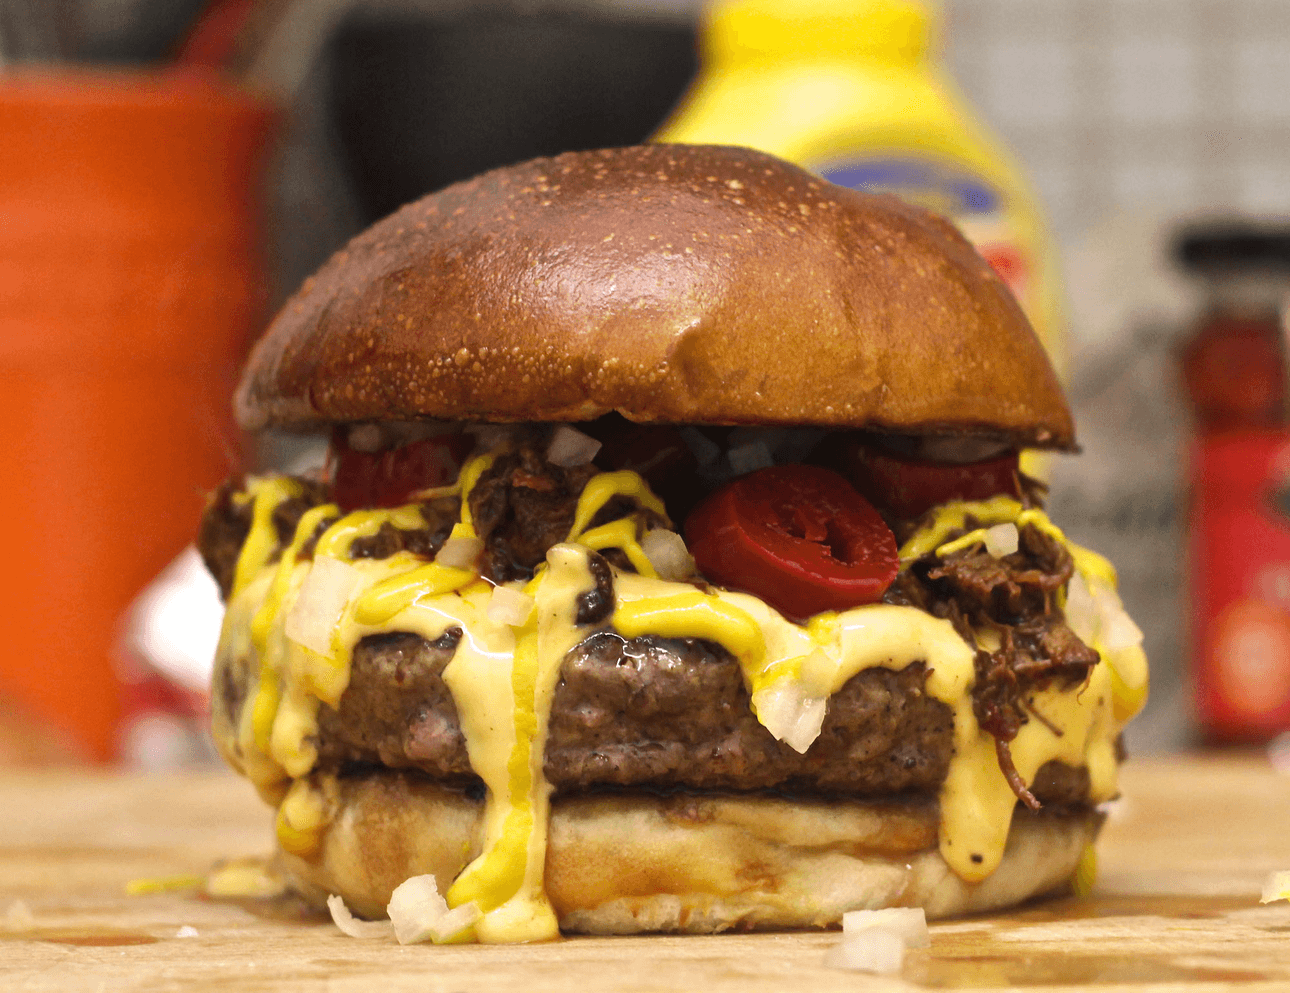 Bearded Clam's chilli cheeseburger. Photo: supplied